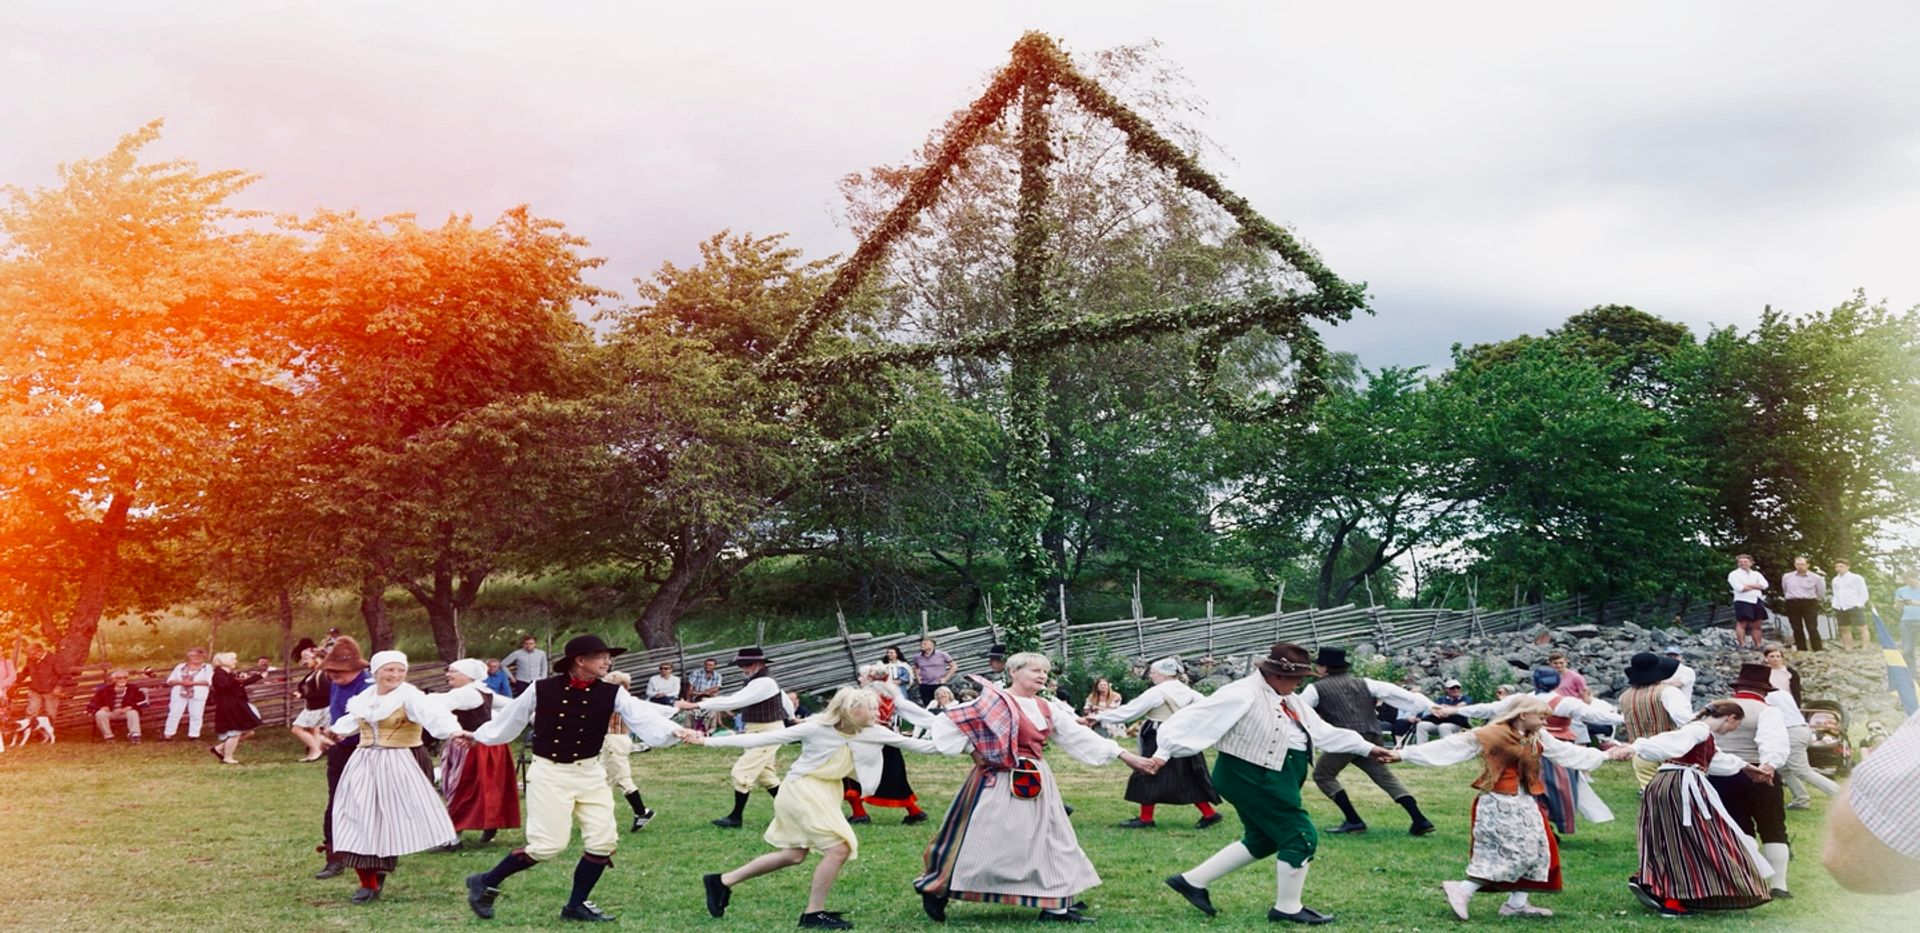 People dressed in folk costumes dancing around a maypole.